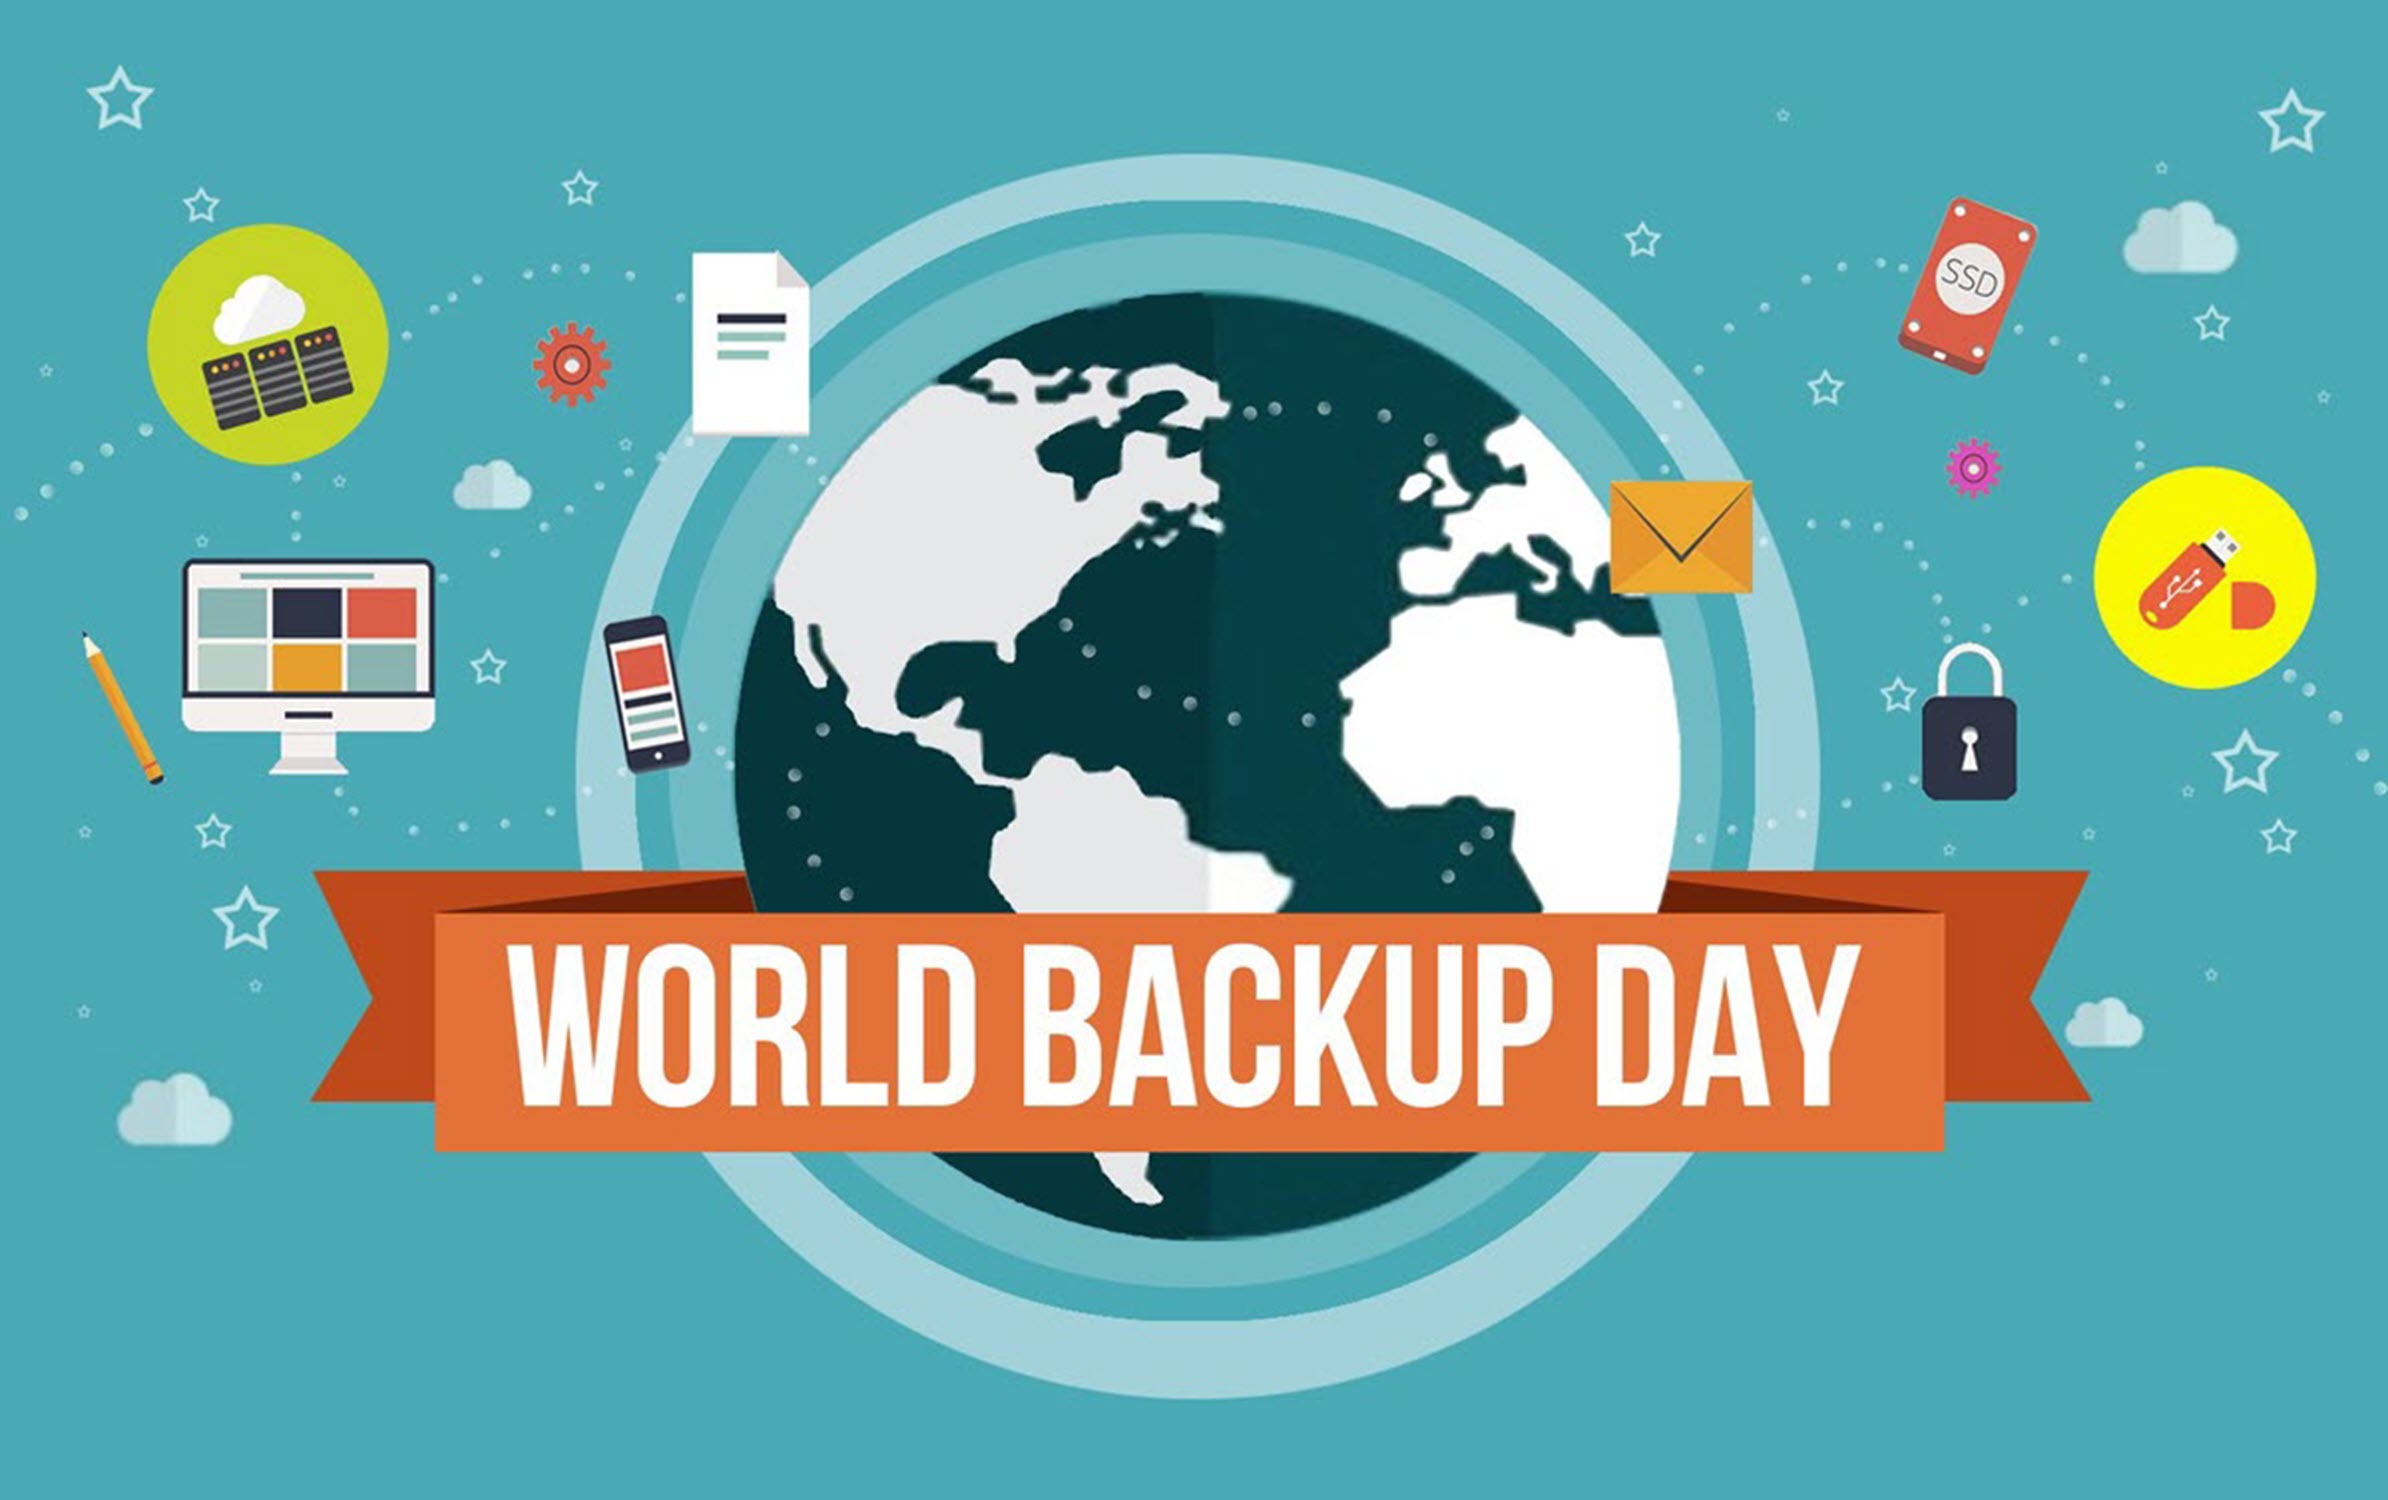 World Backup Day - You've spent years gathering genealogy data, but how secure is it?